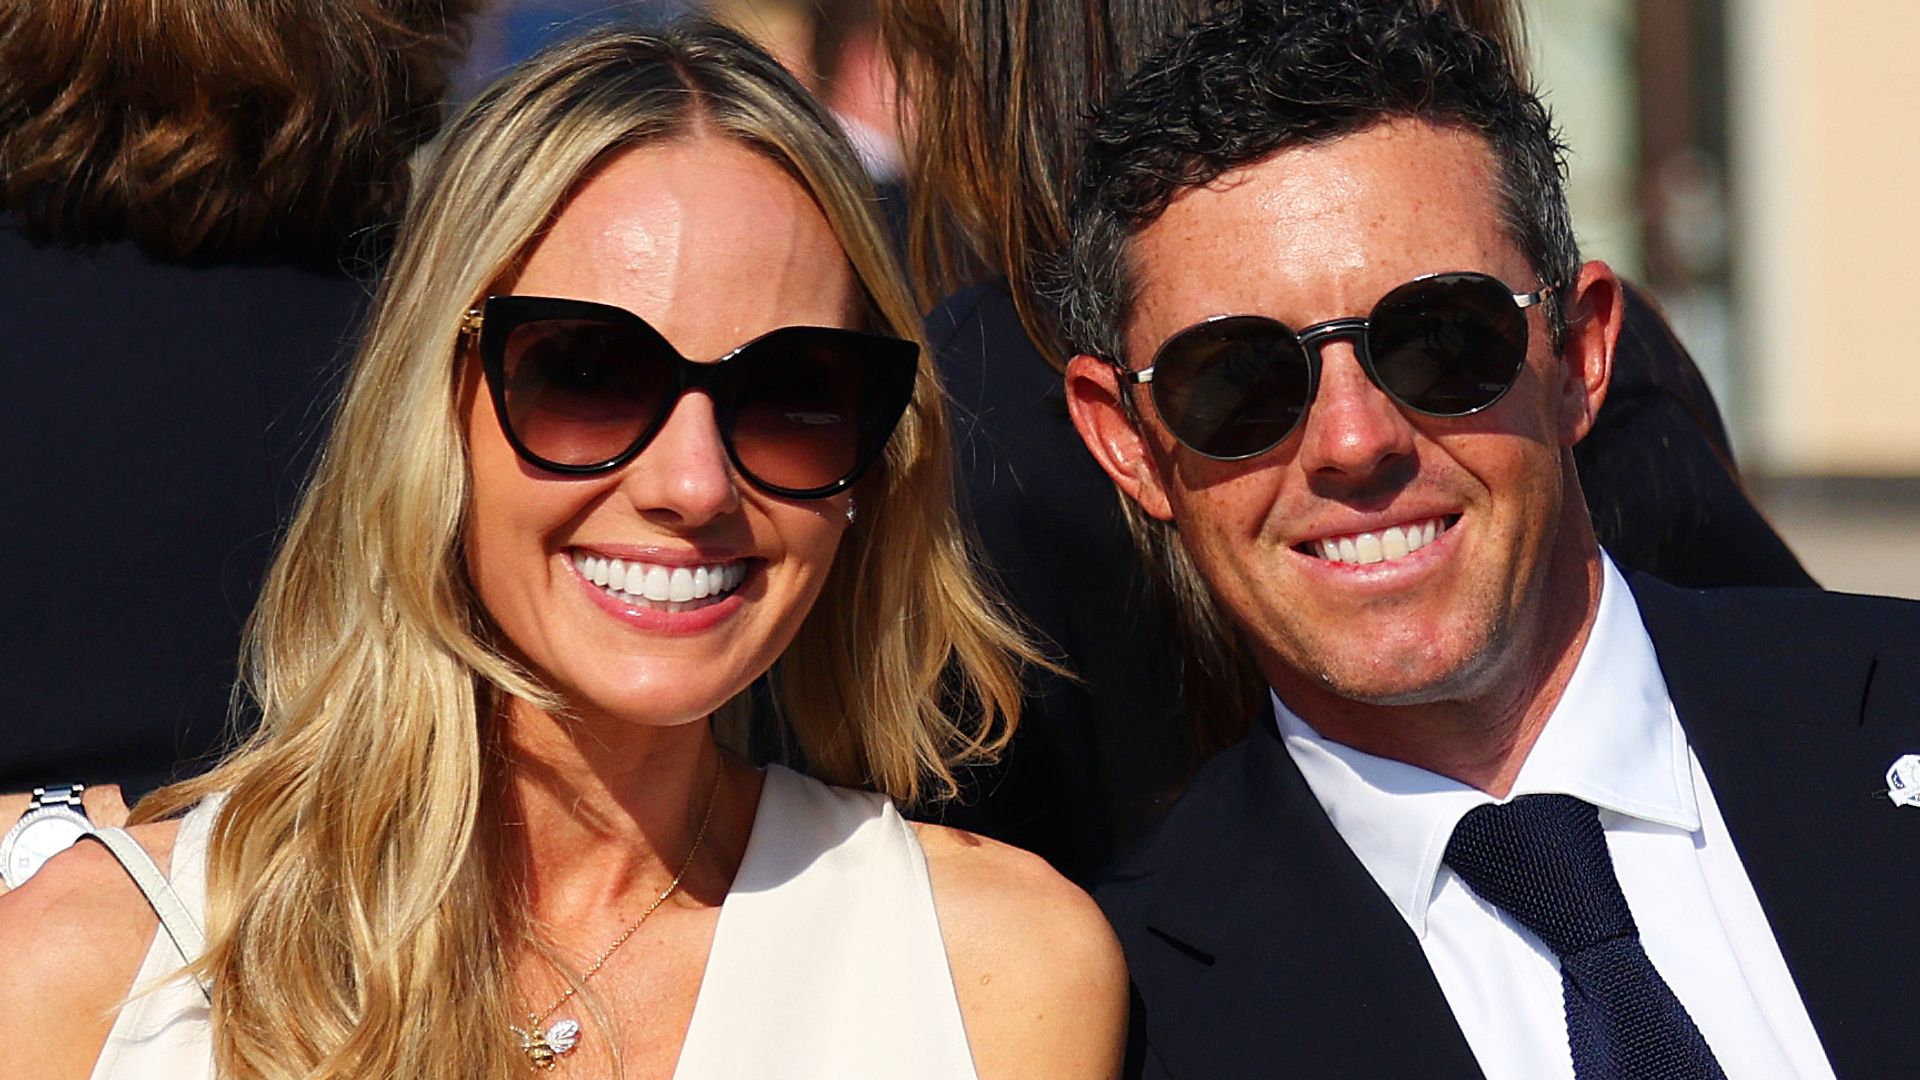 Rory McIloroy in a suit and sunglasses with his wife Erica in a white dress